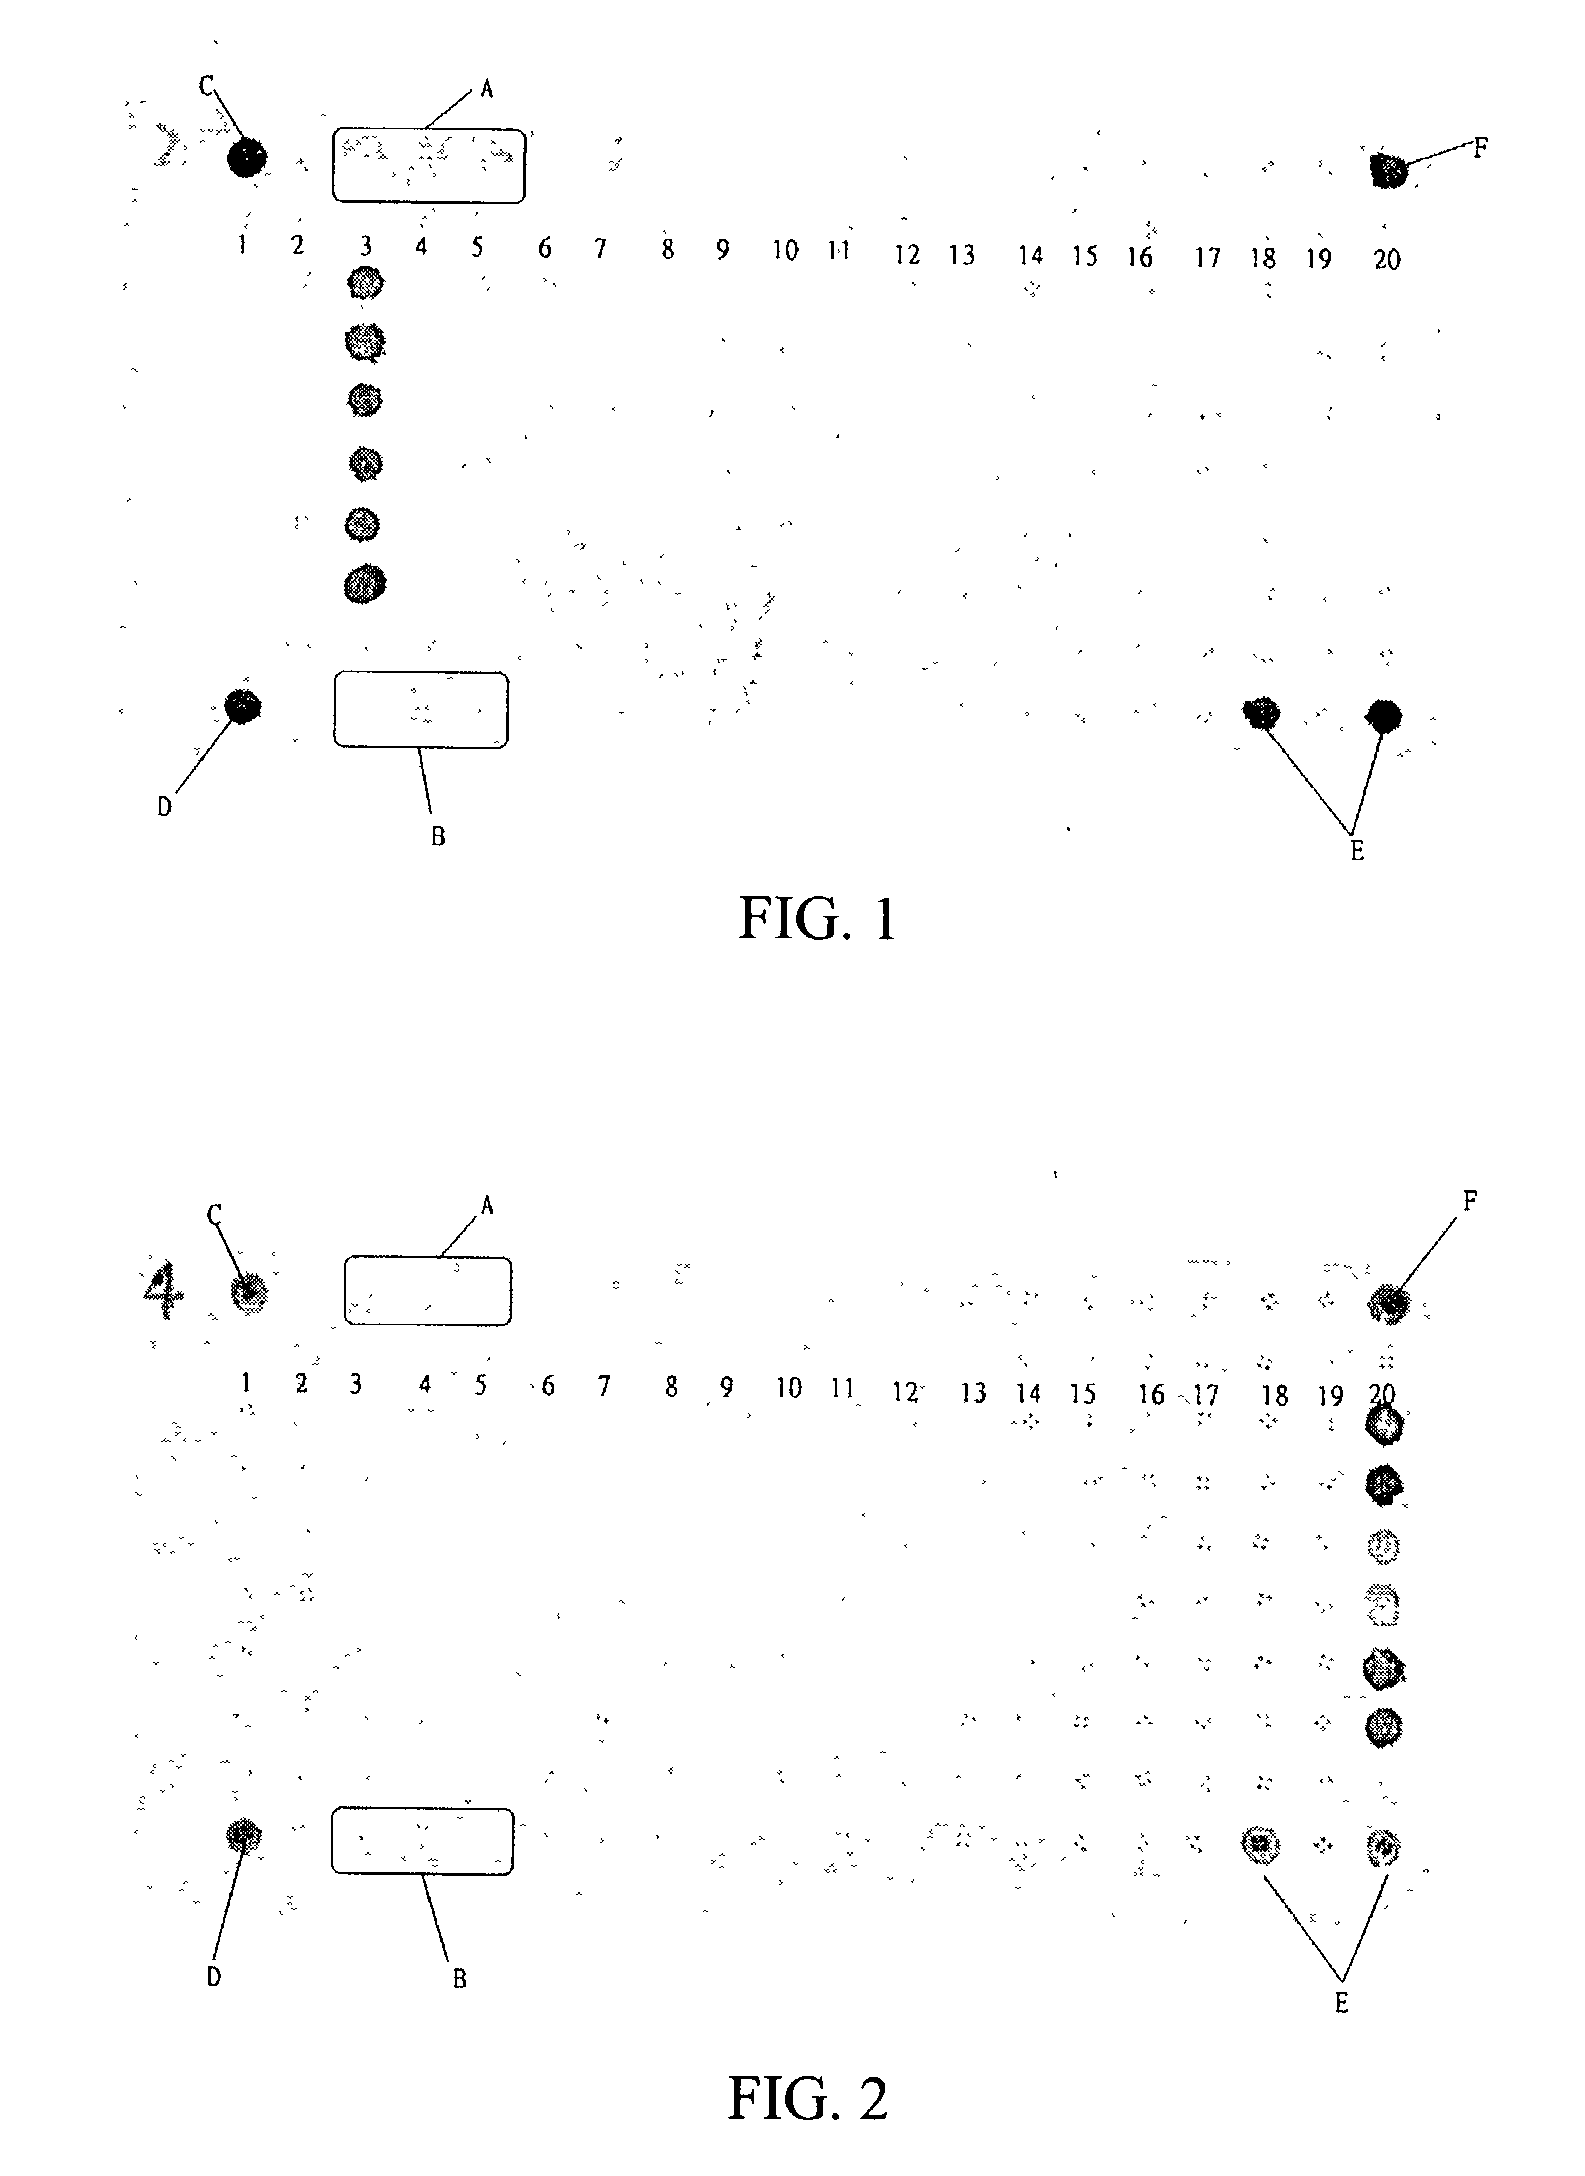 Nucleic acid kit for bacterial pathogen diagnosis and method for using the same